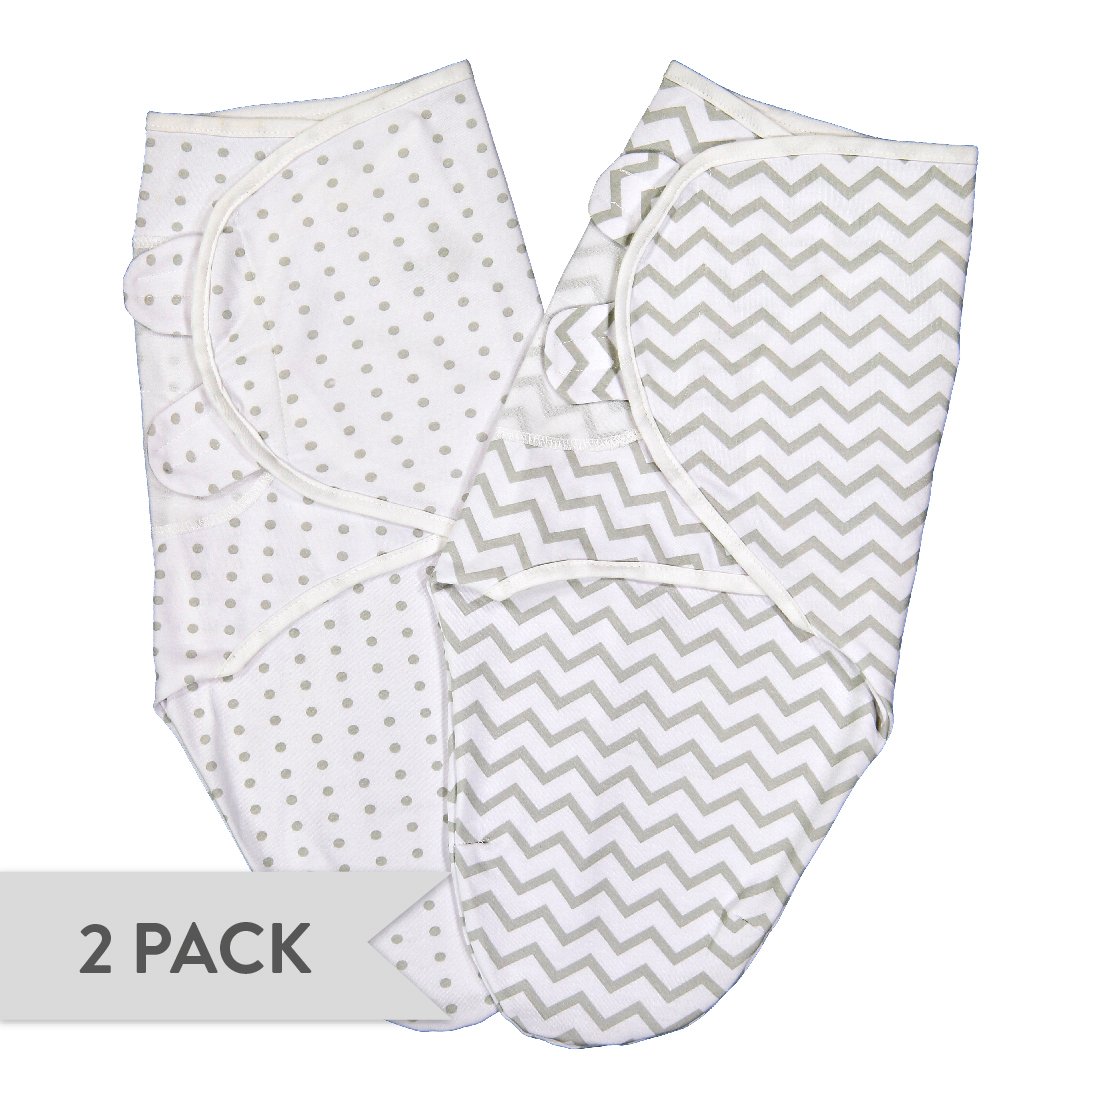 Ely's & Co. Adjustable Swaddle Small 0-3 Months 3 Pack